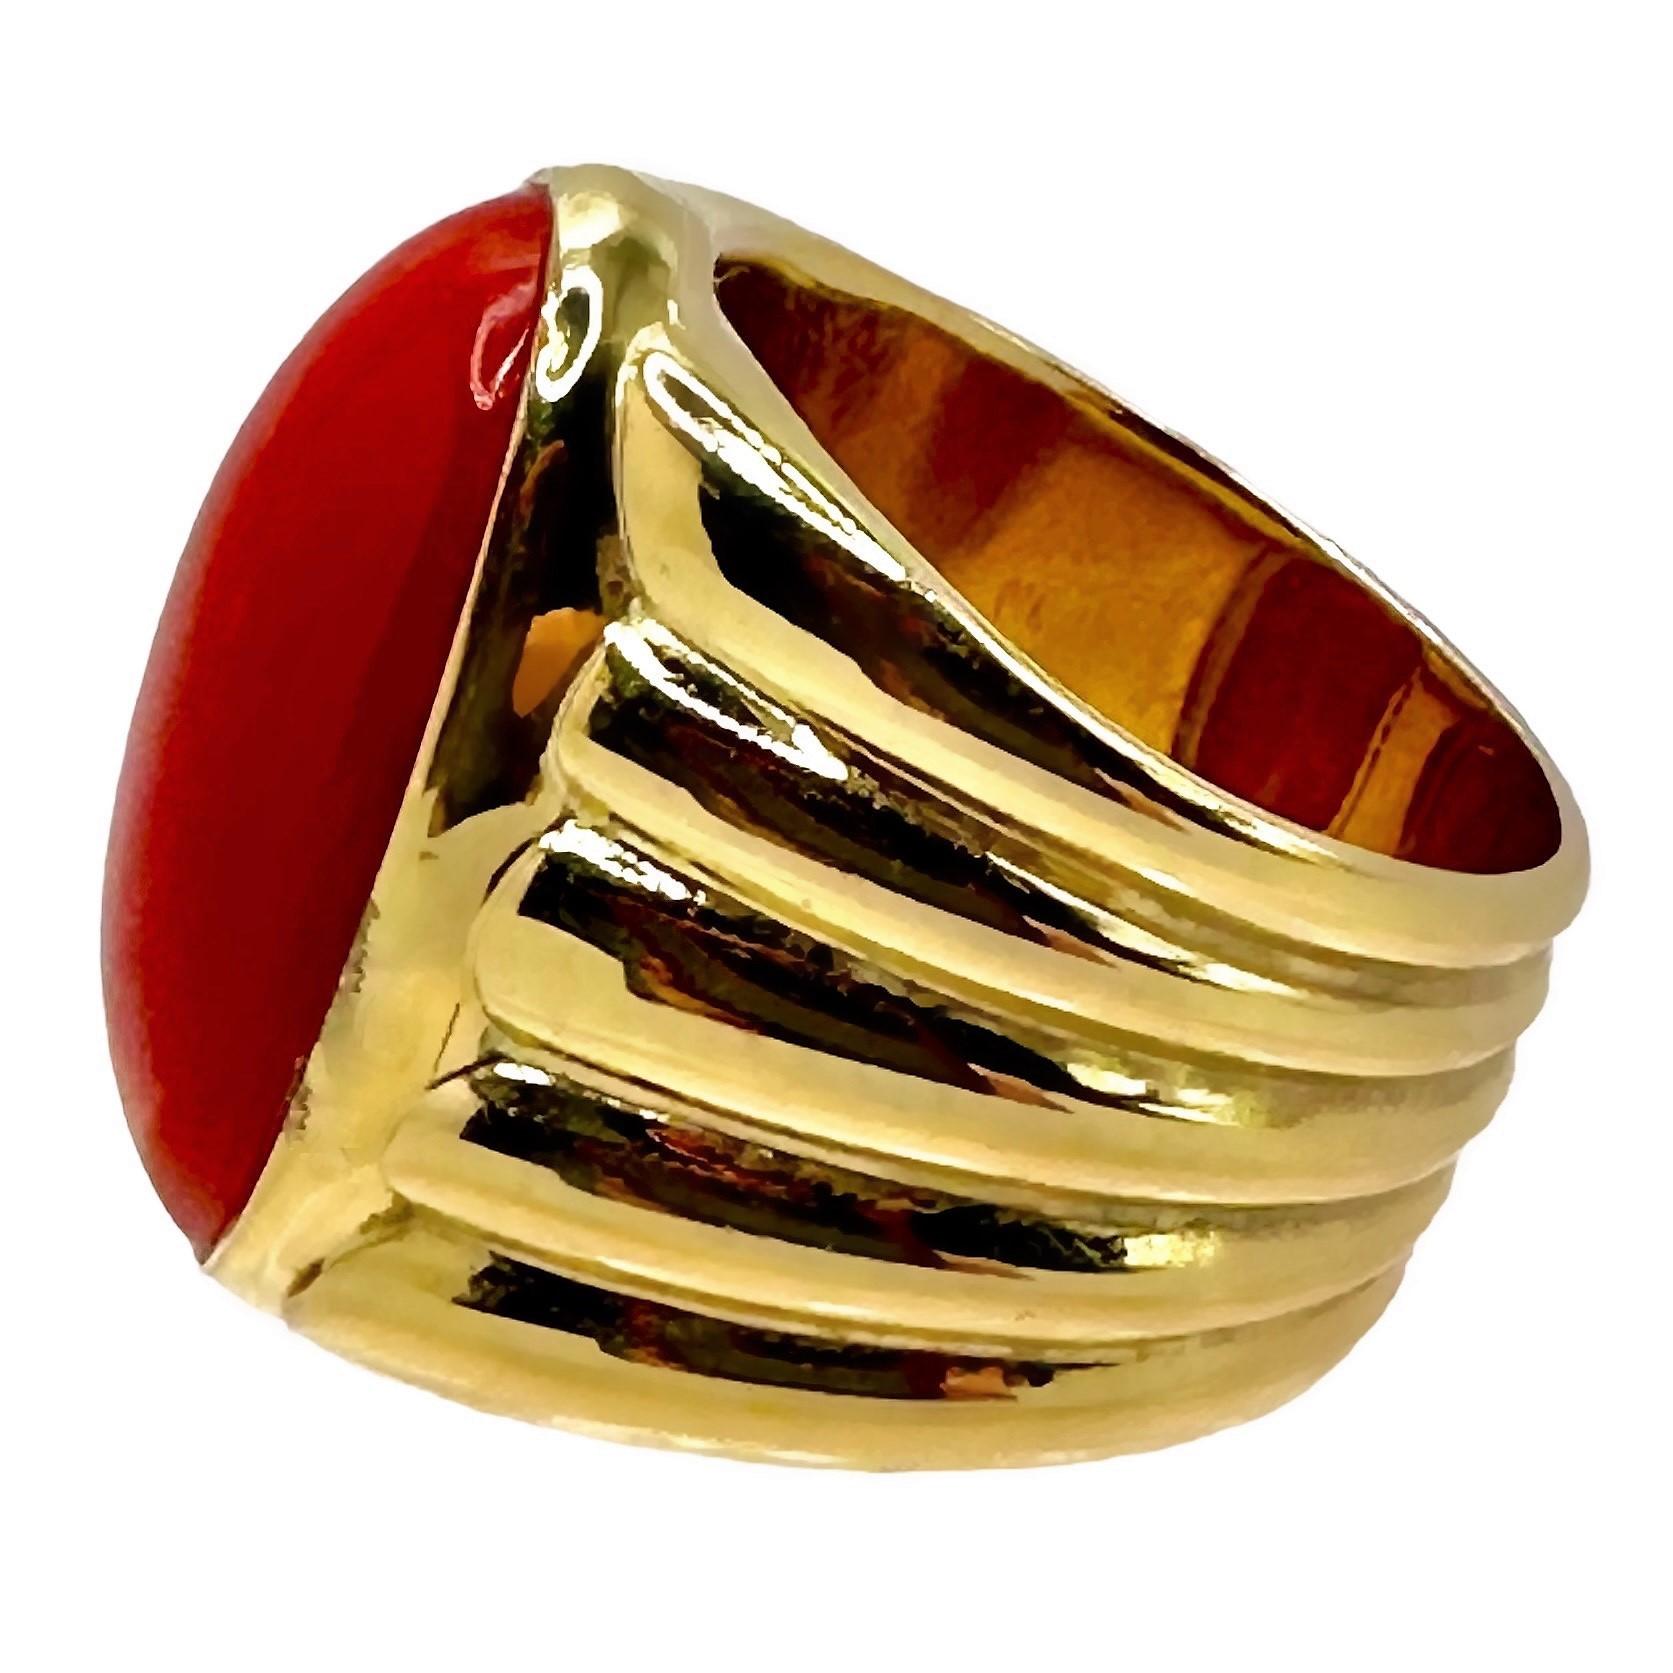 Women's or Men's Wide Fluted Gold Ring with Large Deep Red Oxblood Cabochon For Sale